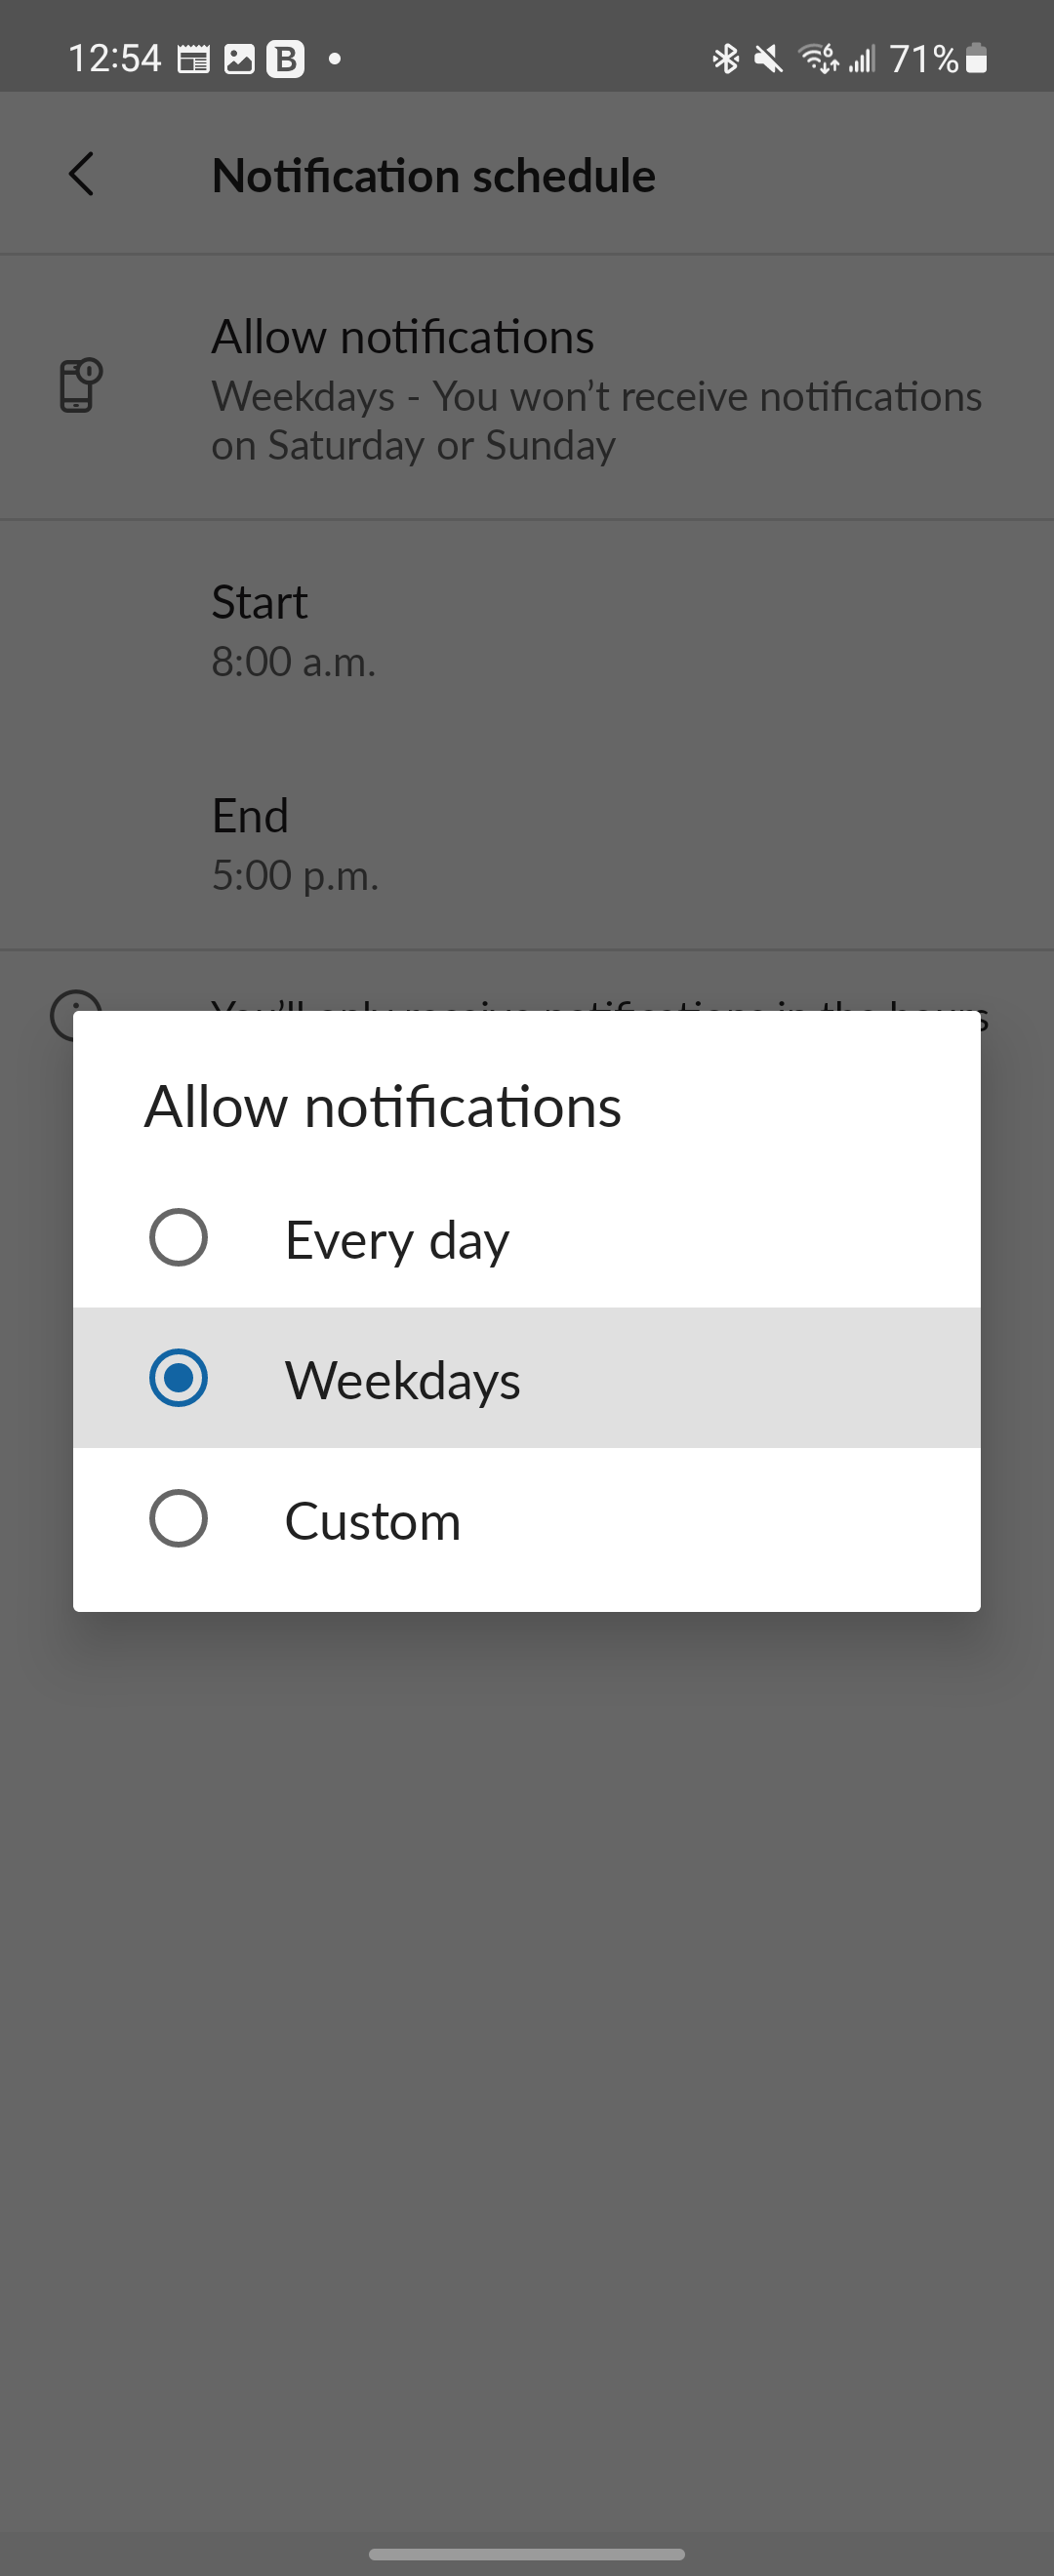 Slack notifications schedule submenu with Weekdays highlighted